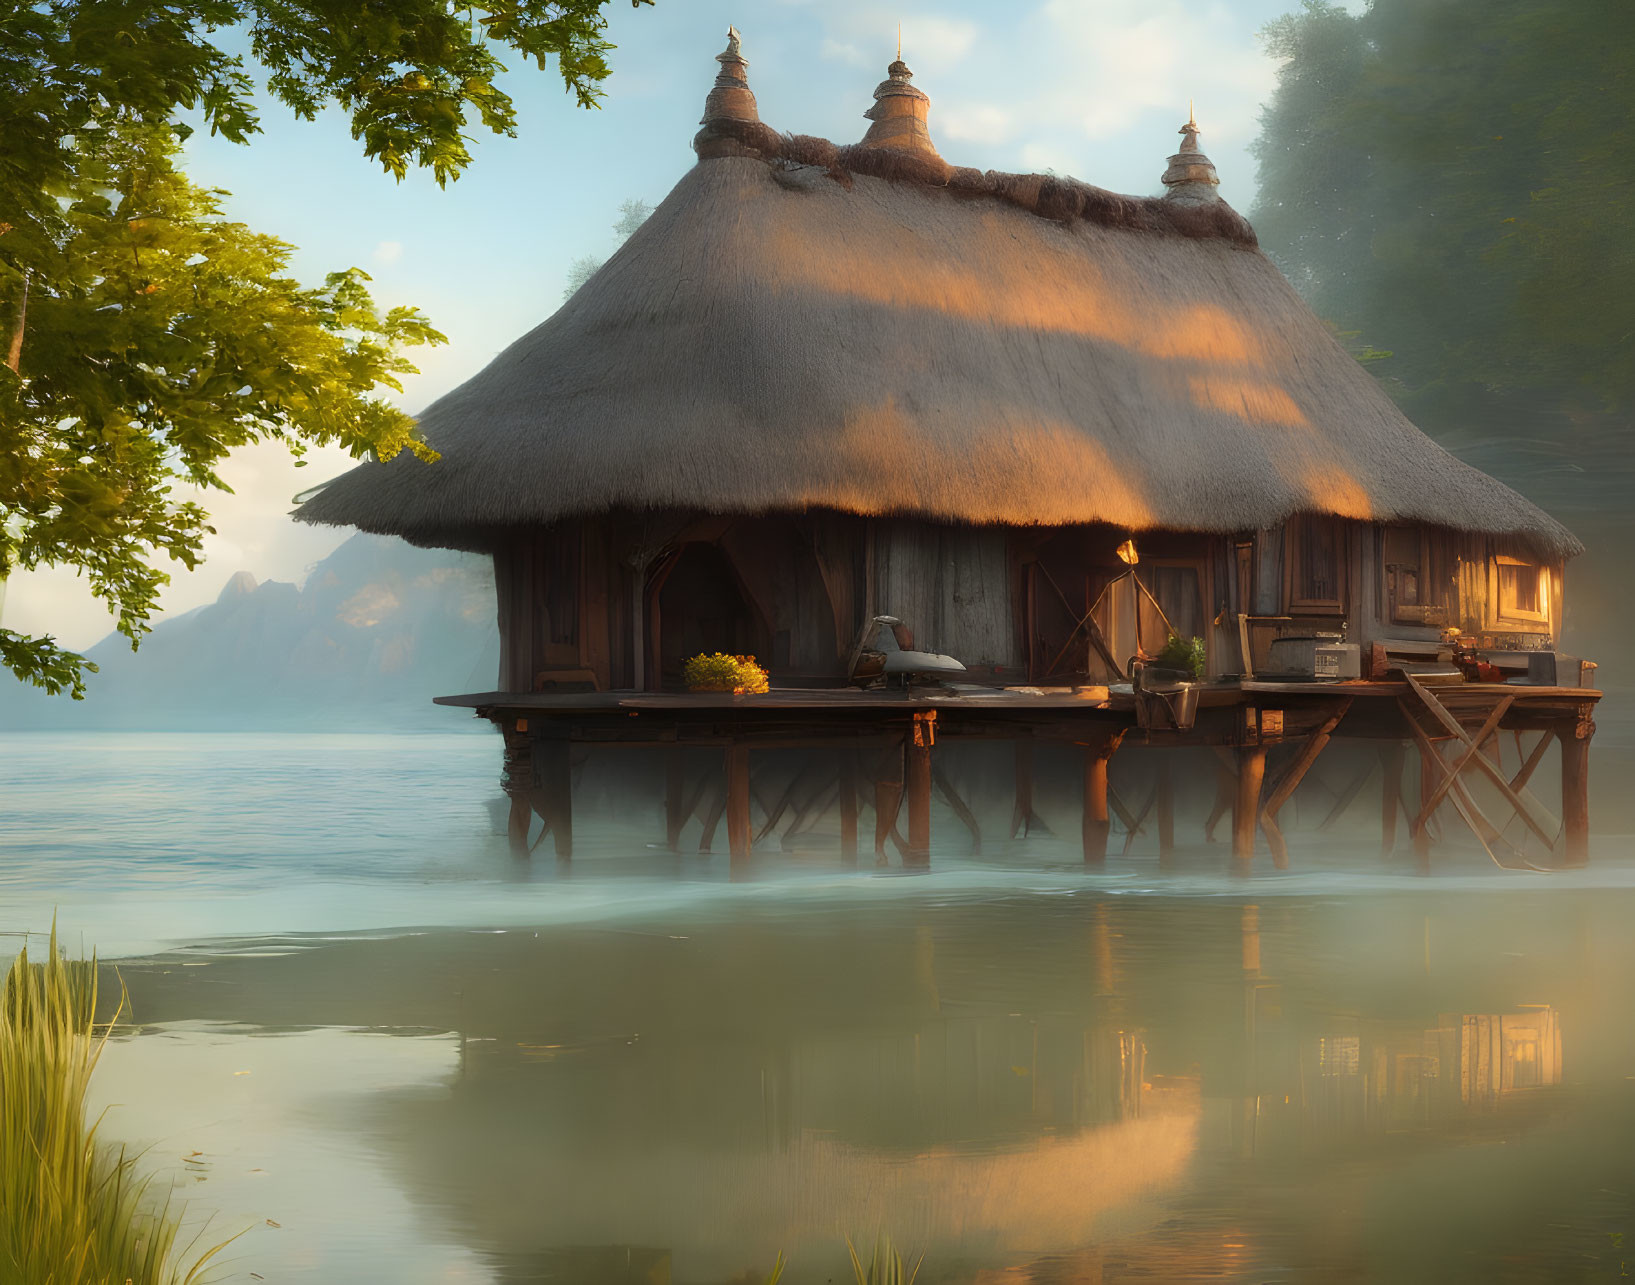 Serene sunrise scene of thatched-roof hut on stilts over water